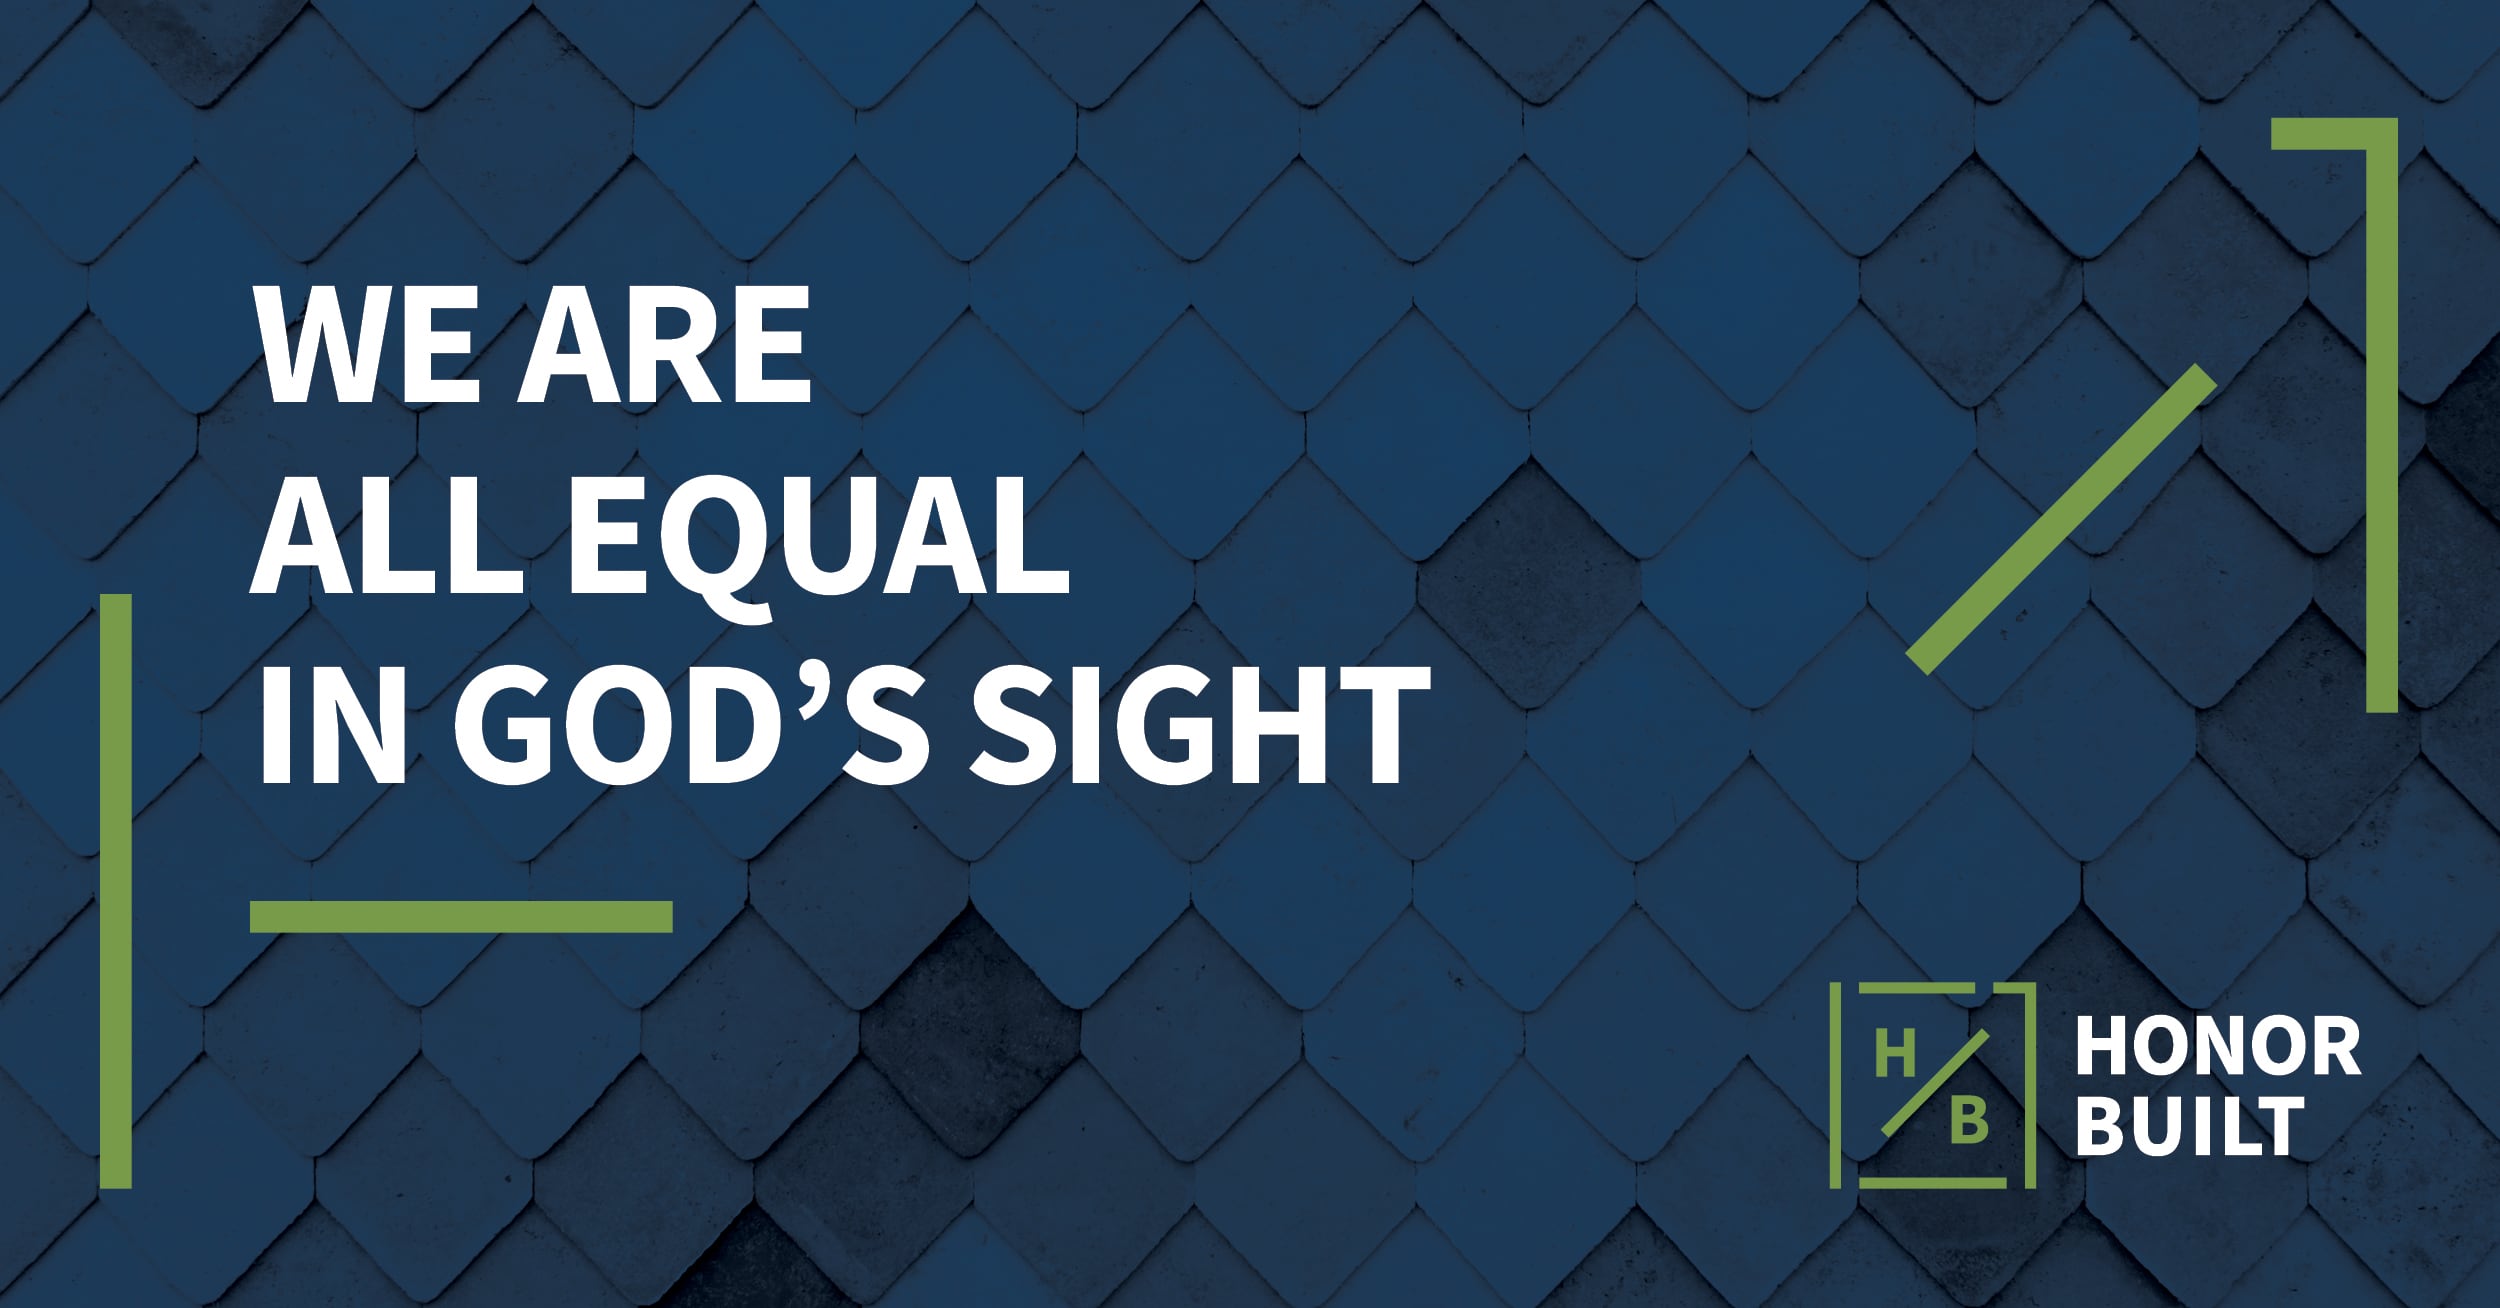 HONORISM #14: We are all equal in God’s sight